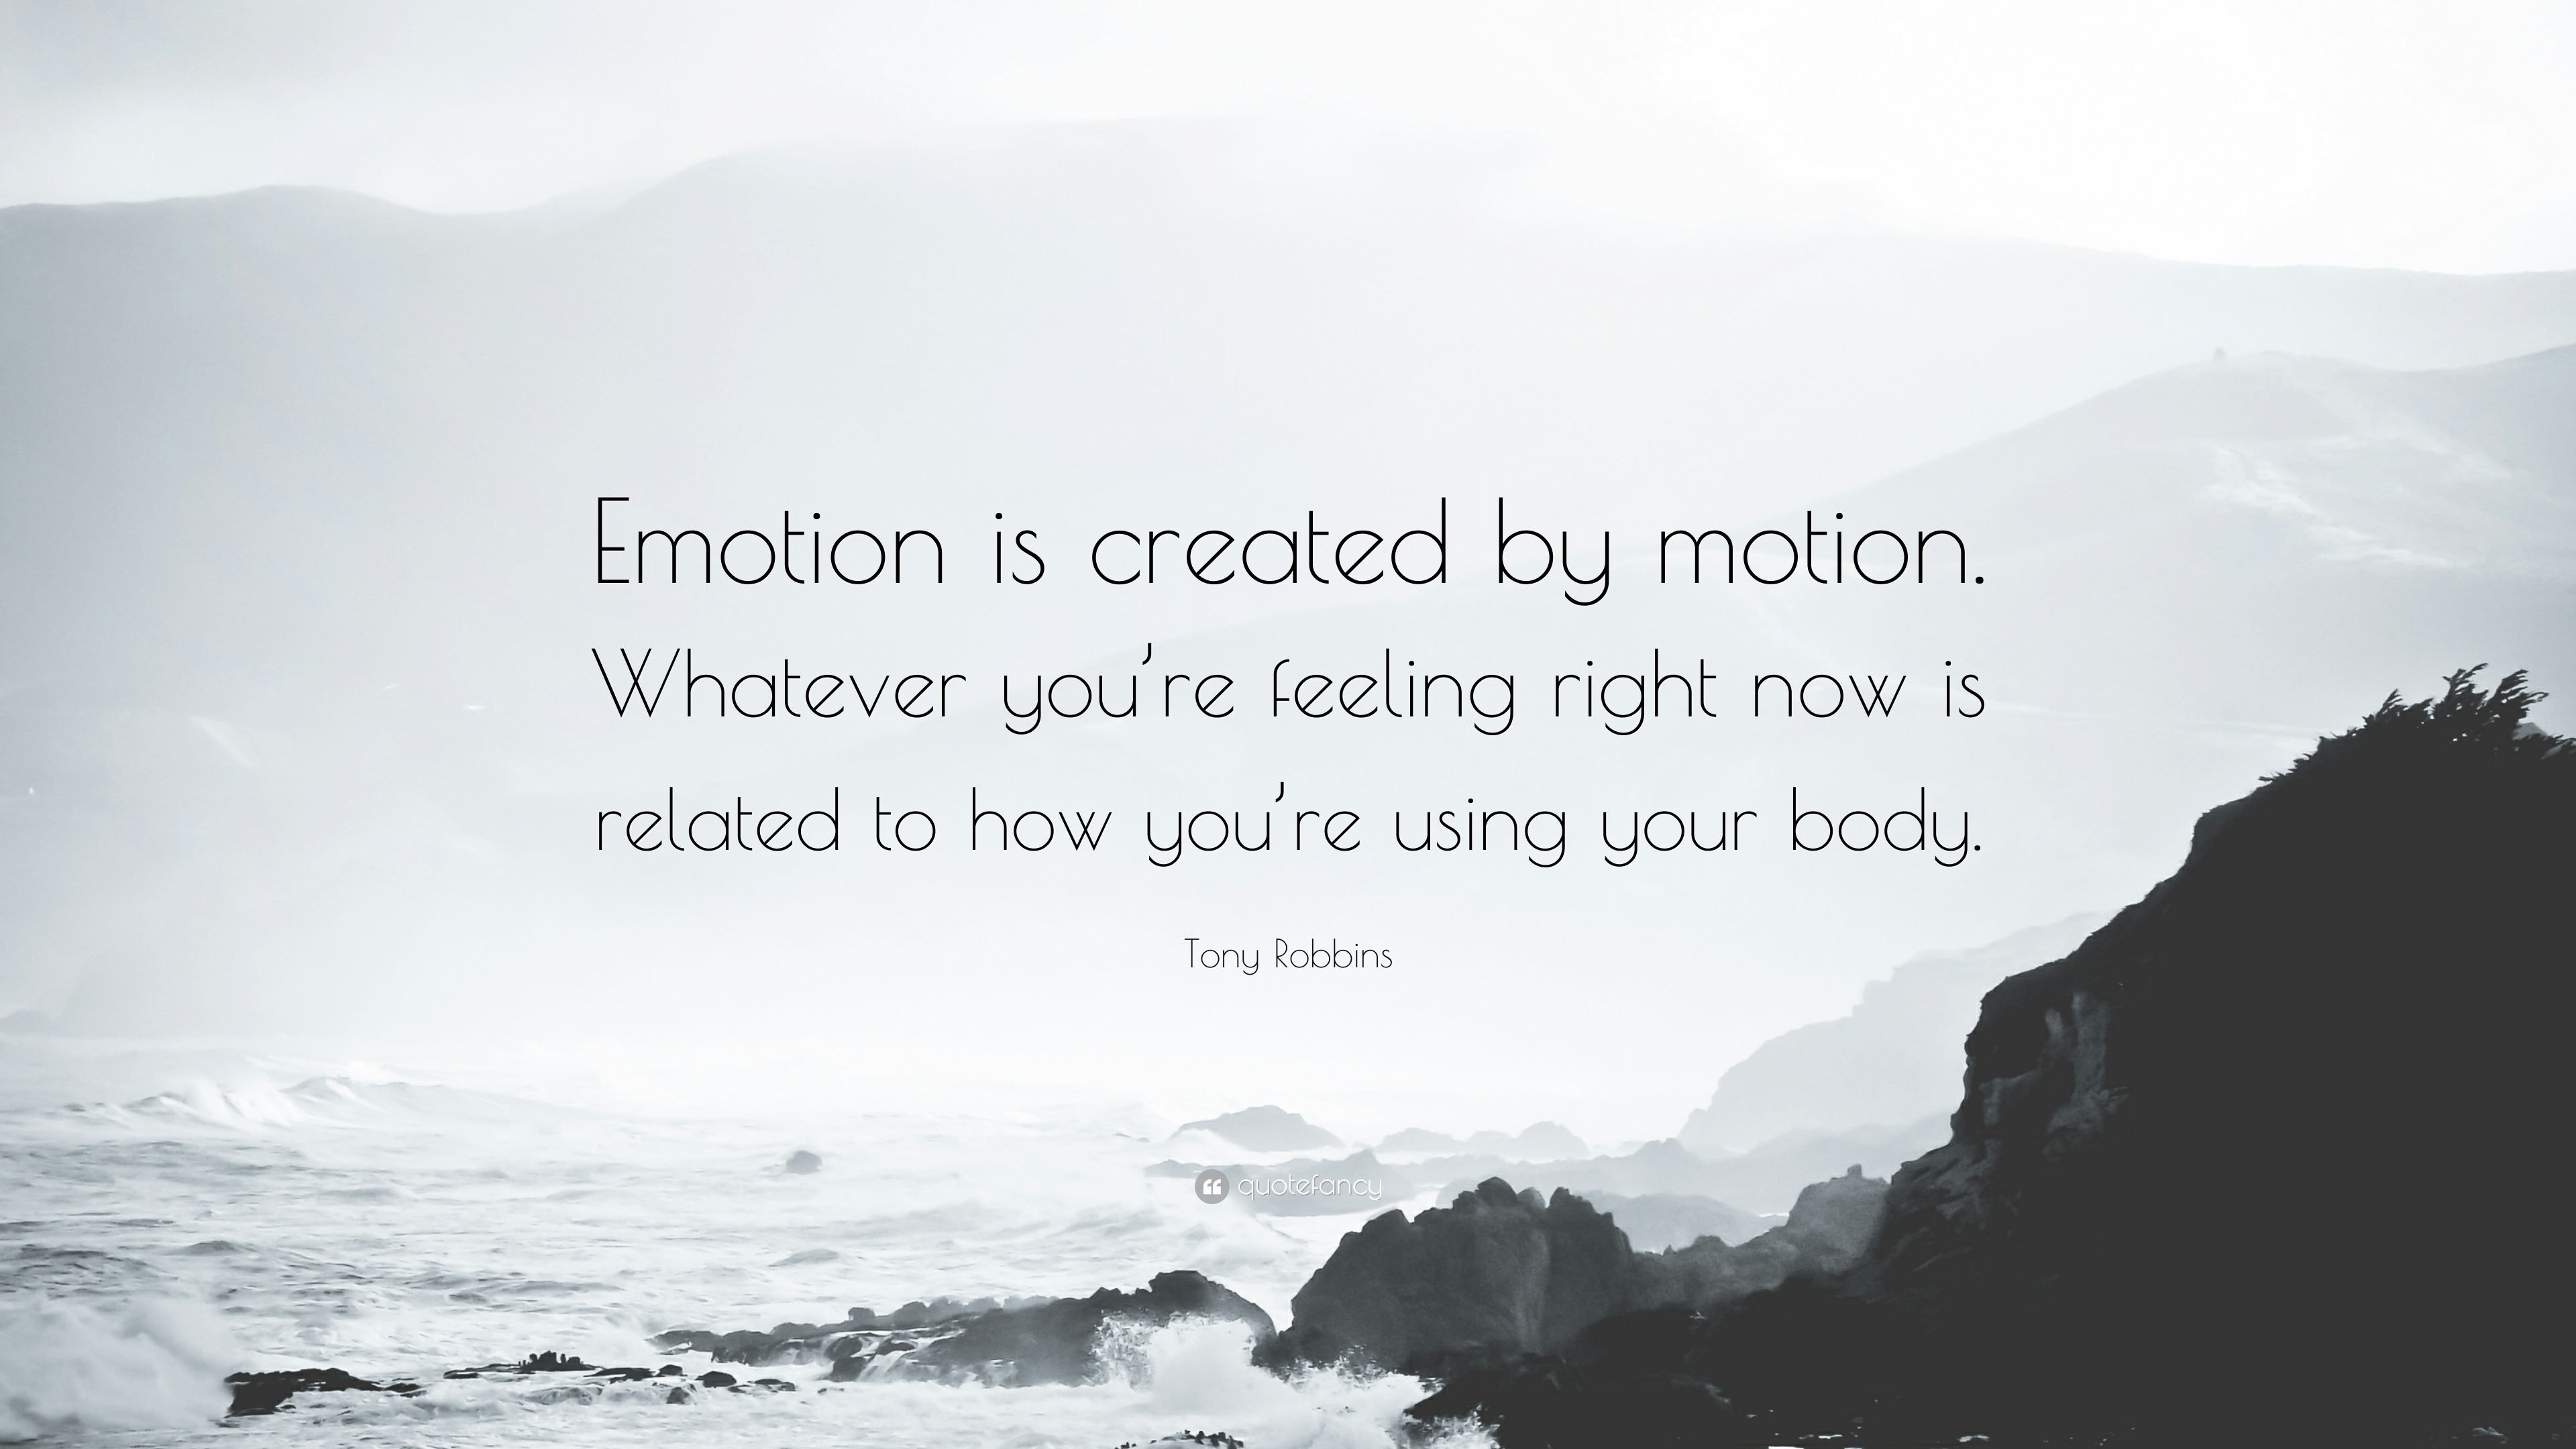 Tony Robbins Quote: “Emotion is created by motion. Whatever you're